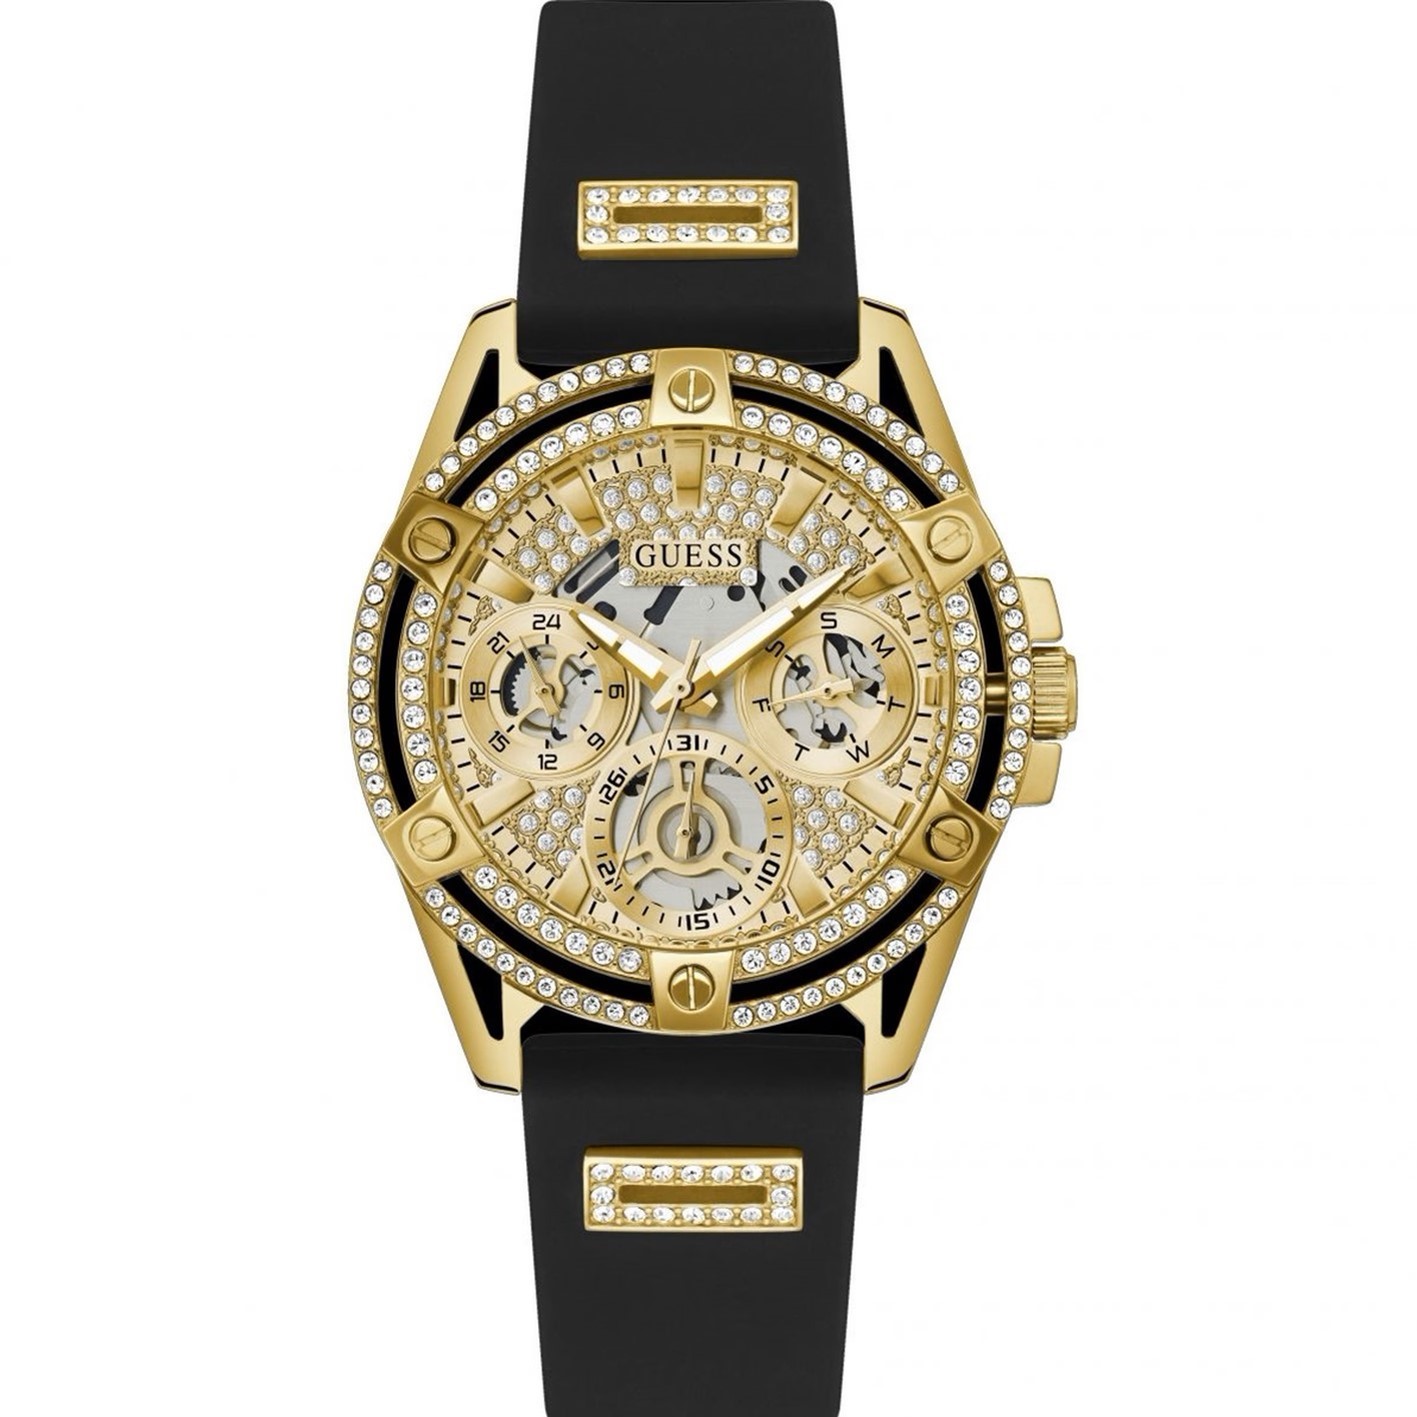 ĐỒNG HỒ GUESS GOLD-TONE MULTI-FUNCTION BLACK SILICONE WATCH GW0536L3 5